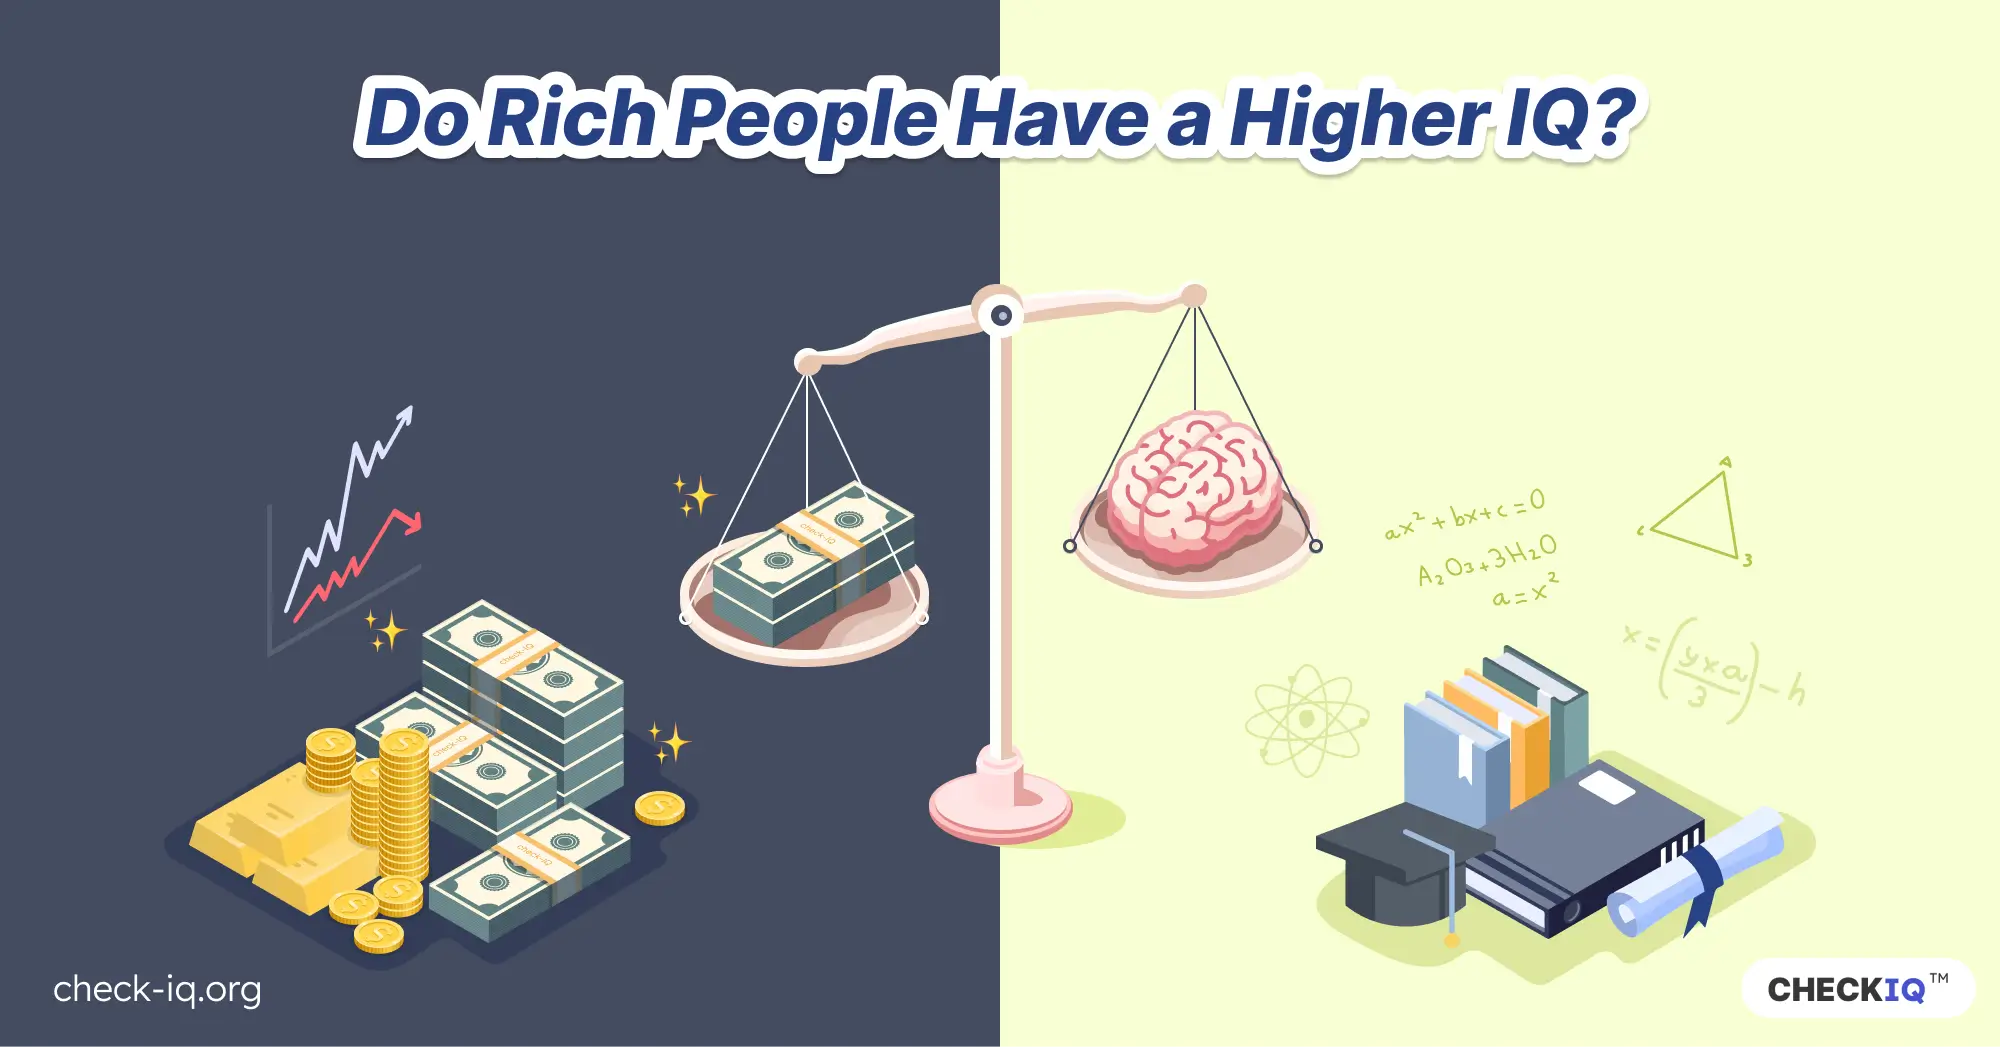 Scales weighing money and a brain to represent wealth vs intelligence